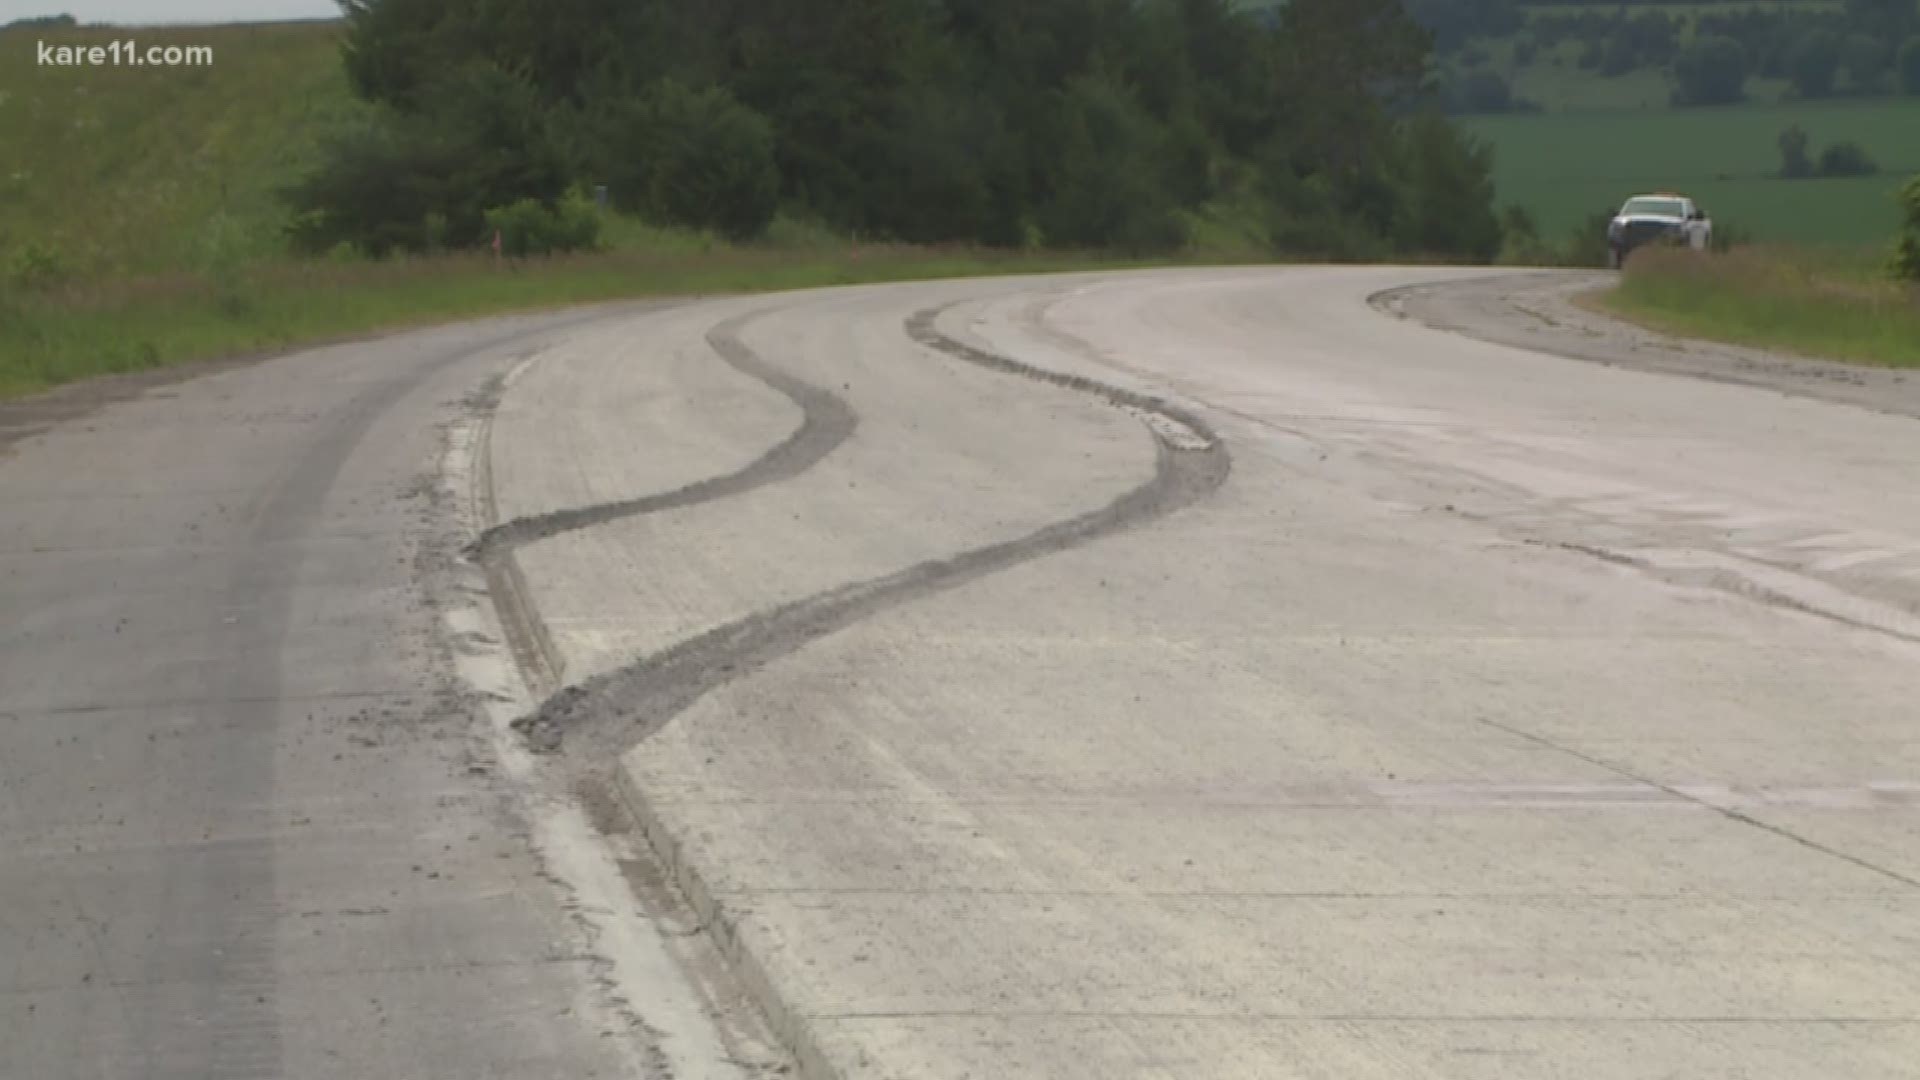 An 800-foot stretch of Highway 63 north of Rochester is ruined after a 95-year-old man drove through wet concrete. Repair estimates top $100,000. https://kare11.tv/2tNAMLc